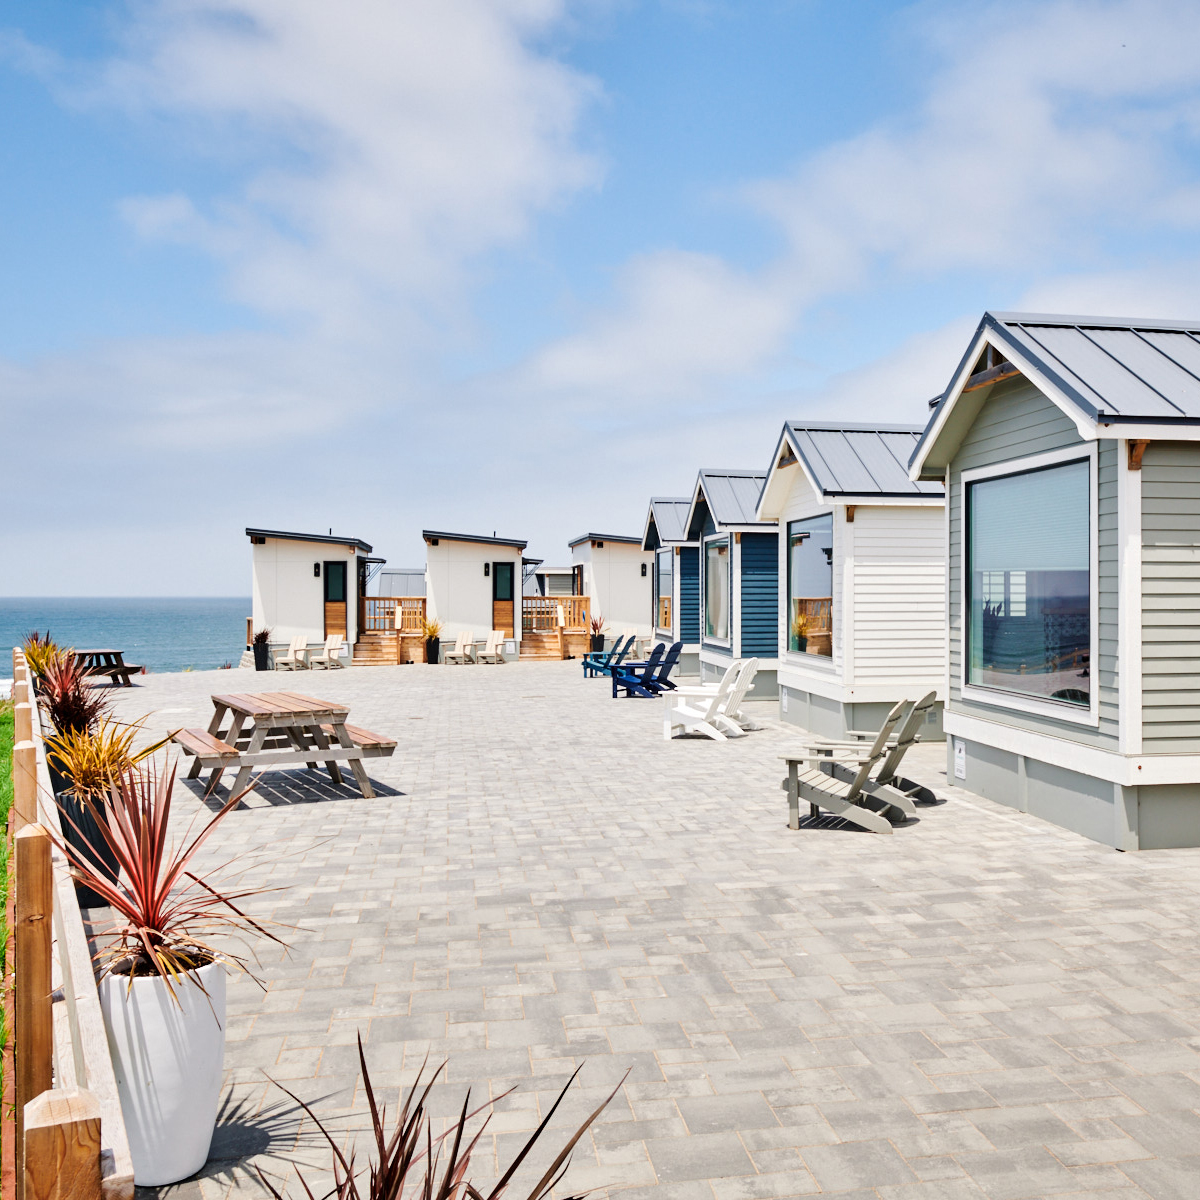 The image shows a row of modern, small coastal cabins with large windows and gray roofs, facing the ocean. There are deck chairs, picnic tables, and planters on a paved patio.